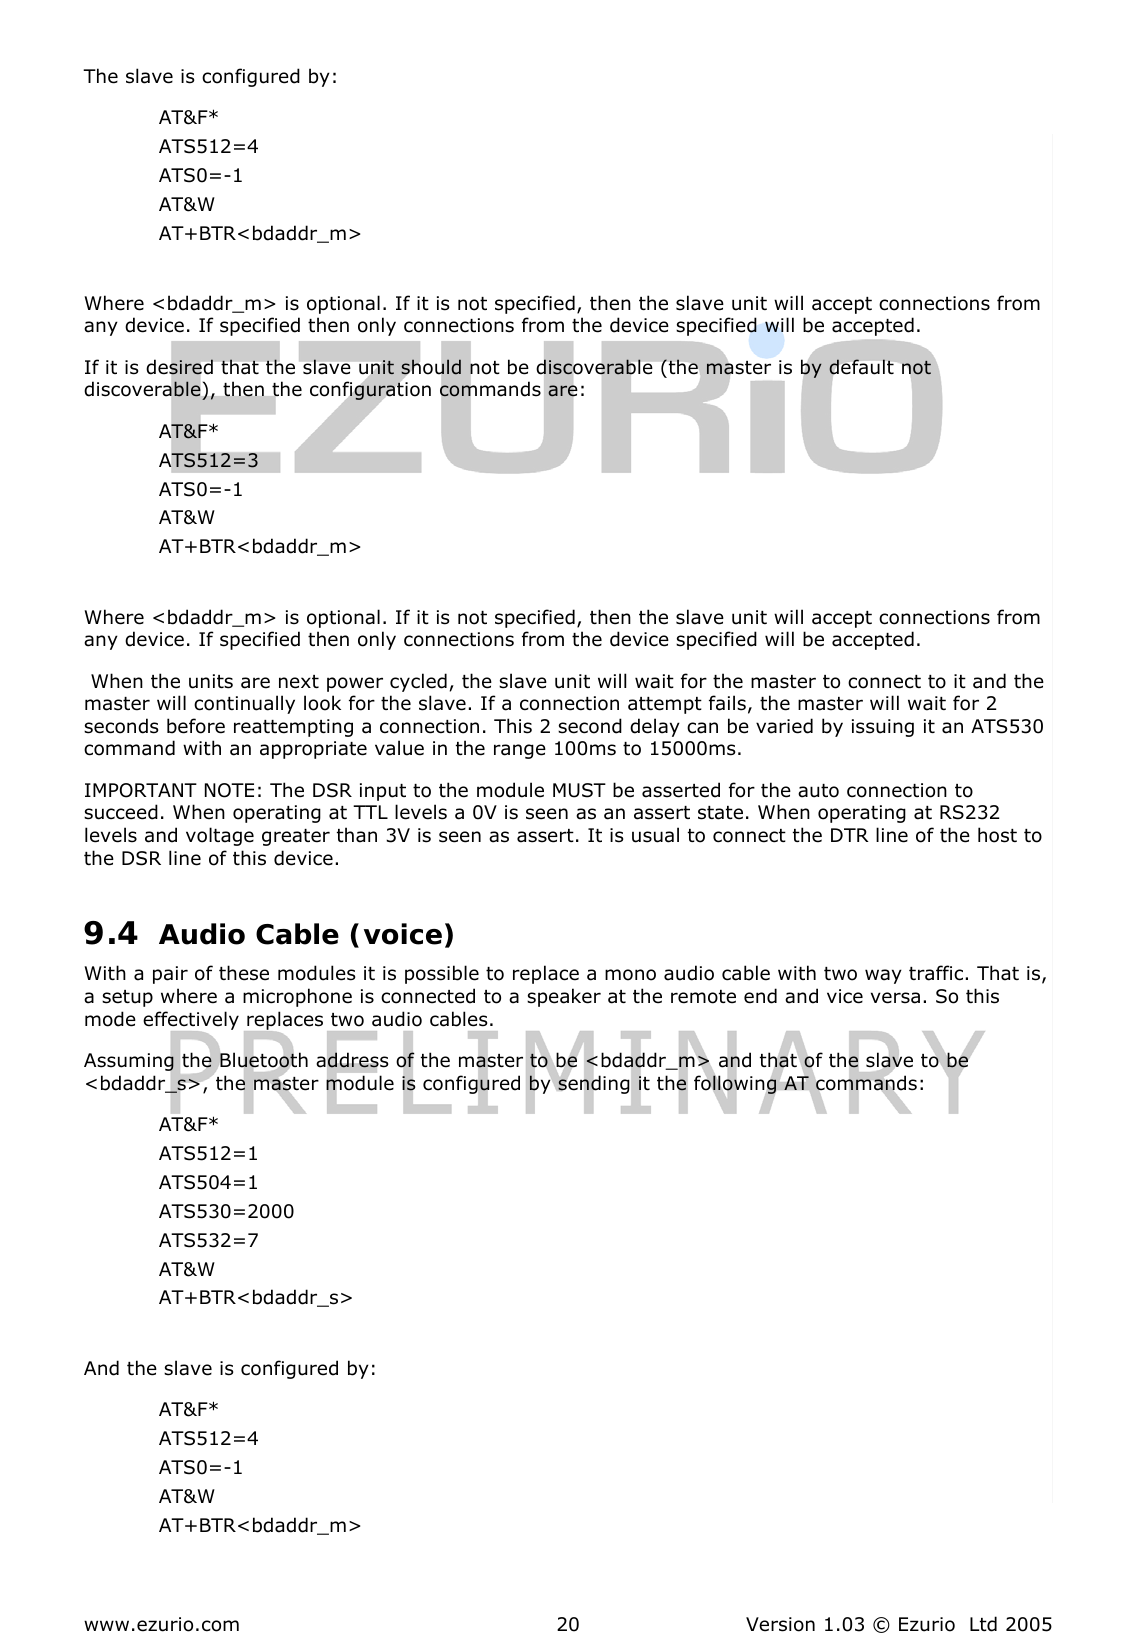  www.ezurio.com  Version 1.03 © Ezurio  Ltd 2005 20 The slave is configured by: AT&amp;F* ATS512=4 ATS0=-1 AT&amp;W AT+BTR&lt;bdaddr_m&gt;  Where &lt;bdaddr_m&gt; is optional. If it is not specified, then the slave unit will accept connections from any device. If specified then only connections from the device specified will be accepted. If it is desired that the slave unit should not be discoverable (the master is by default not discoverable), then the configuration commands are: AT&amp;F* ATS512=3 ATS0=-1 AT&amp;W AT+BTR&lt;bdaddr_m&gt;  Where &lt;bdaddr_m&gt; is optional. If it is not specified, then the slave unit will accept connections from any device. If specified then only connections from the device specified will be accepted.  When the units are next power cycled, the slave unit will wait for the master to connect to it and the master will continually look for the slave. If a connection attempt fails, the master will wait for 2 seconds before reattempting a connection. This 2 second delay can be varied by issuing it an ATS530 command with an appropriate value in the range 100ms to 15000ms. IMPORTANT NOTE: The DSR input to the module MUST be asserted for the auto connection to succeed. When operating at TTL levels a 0V is seen as an assert state. When operating at RS232 levels and voltage greater than 3V is seen as assert. It is usual to connect the DTR line of the host to the DSR line of this device. 9.4 Audio Cable (voice) With a pair of these modules it is possible to replace a mono audio cable with two way traffic. That is, a setup where a microphone is connected to a speaker at the remote end and vice versa. So this mode effectively replaces two audio cables. Assuming the Bluetooth address of the master to be &lt;bdaddr_m&gt; and that of the slave to be &lt;bdaddr_s&gt;, the master module is configured by sending it the following AT commands: AT&amp;F* ATS512=1 ATS504=1 ATS530=2000 ATS532=7 AT&amp;W AT+BTR&lt;bdaddr_s&gt;  And the slave is configured by: AT&amp;F* ATS512=4 ATS0=-1 AT&amp;W AT+BTR&lt;bdaddr_m&gt;  